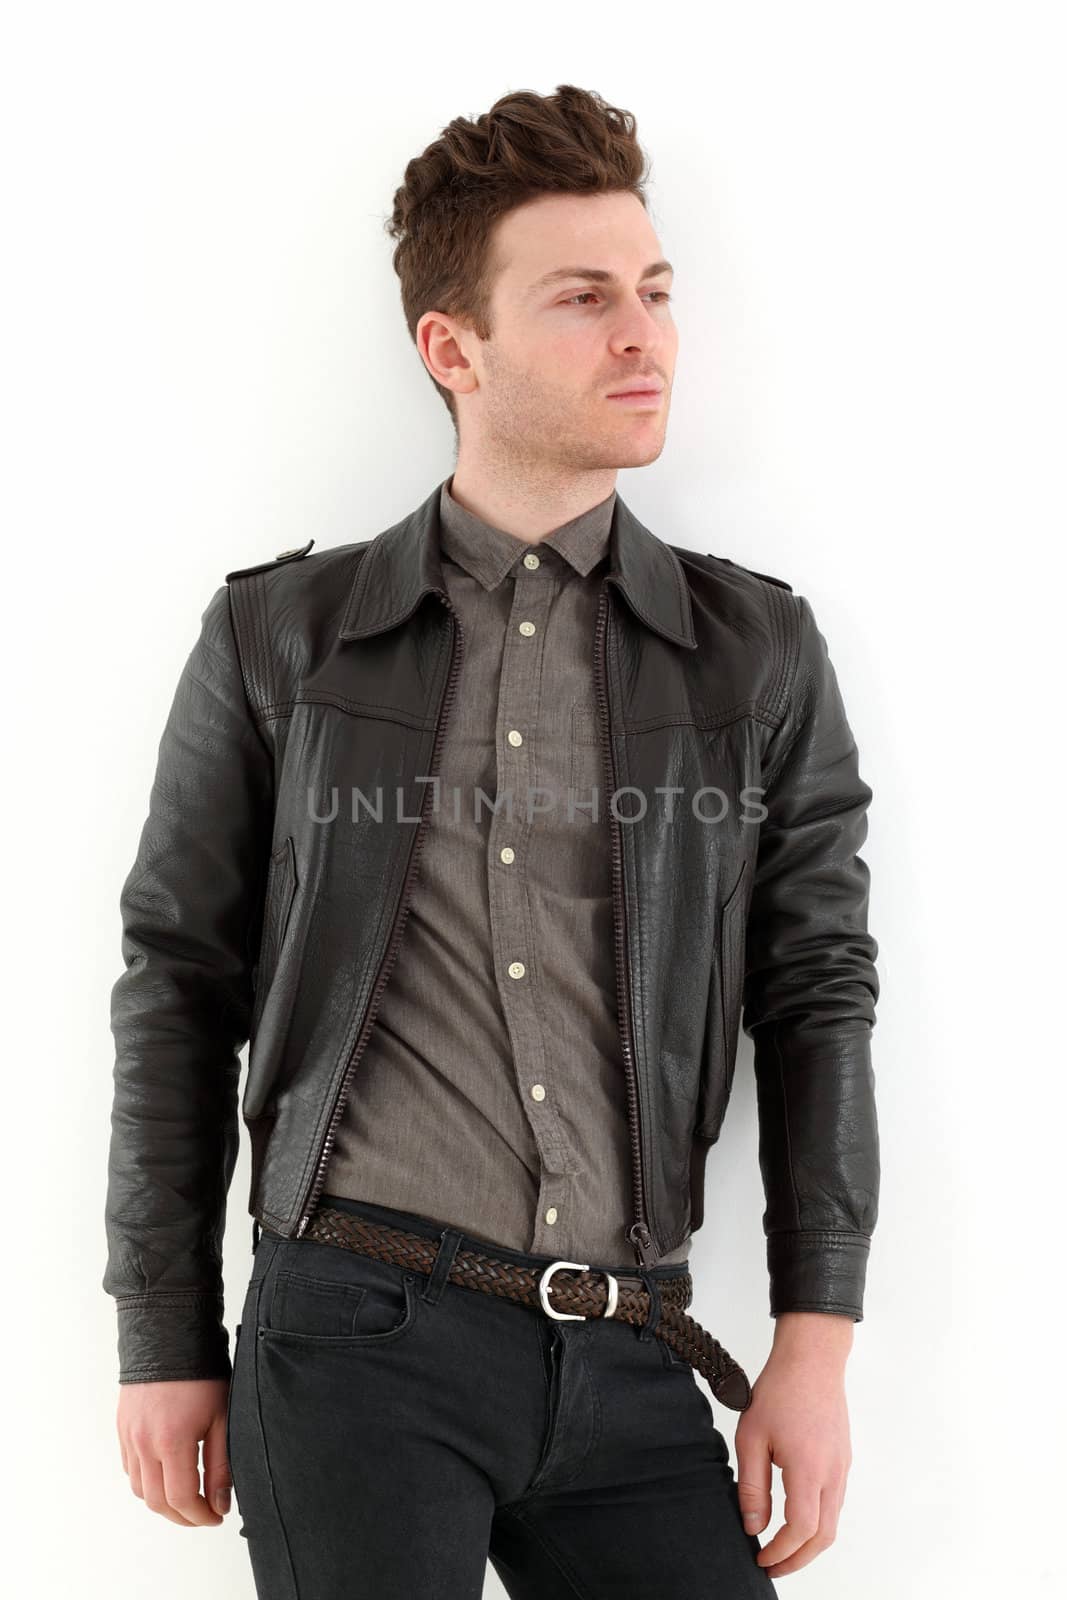 Young adult man posing with leather jacket by shamtor